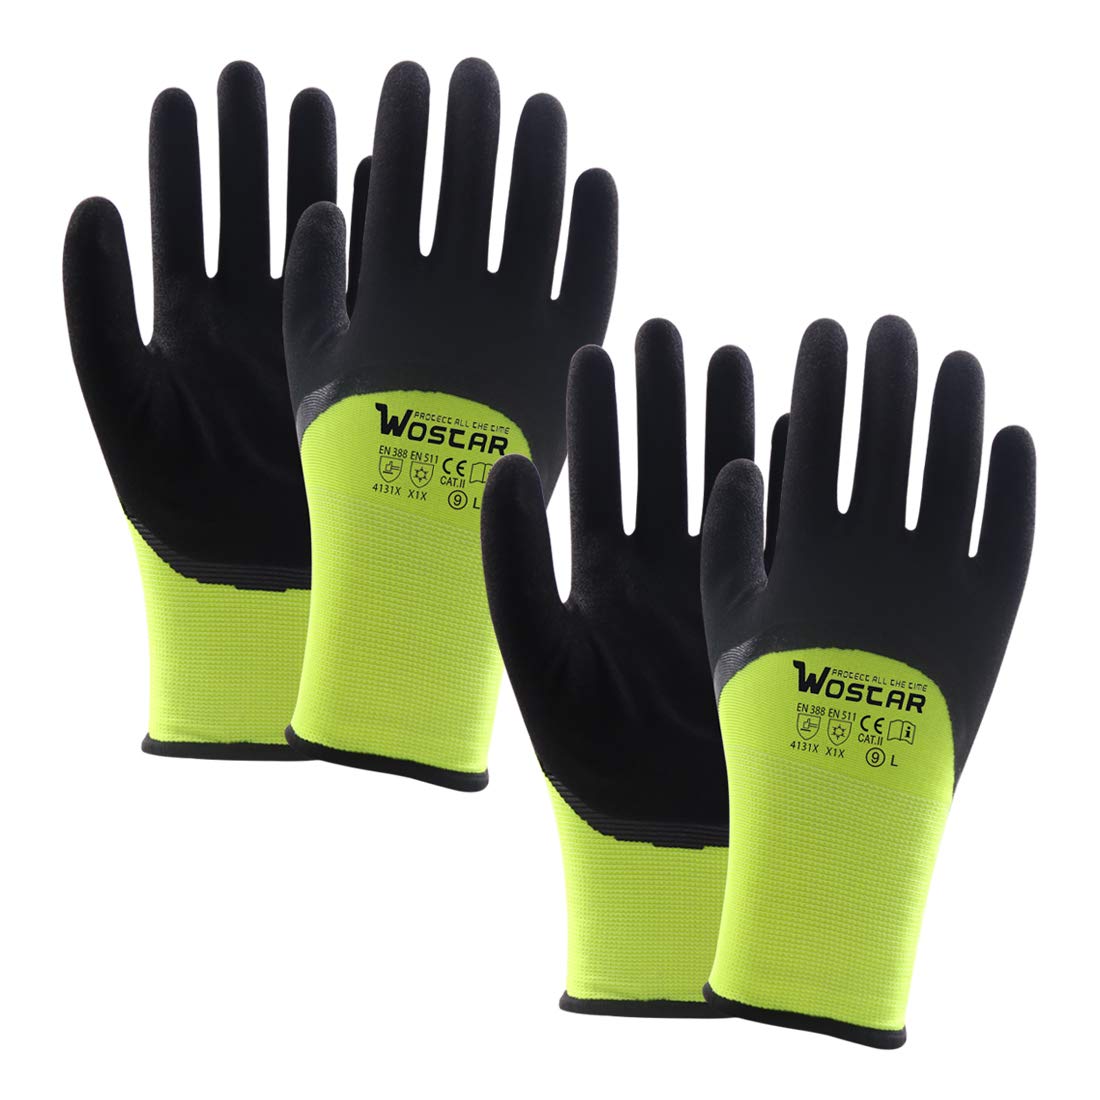 2-Pair Wostar Fleece Lined Nitrile Knitted Acrylic Terry Gloves: Yellow 2-Pair (XL) $5, Red 2-Pair (2XL) $5 & More + Free Shipping w/ Prime or $25+